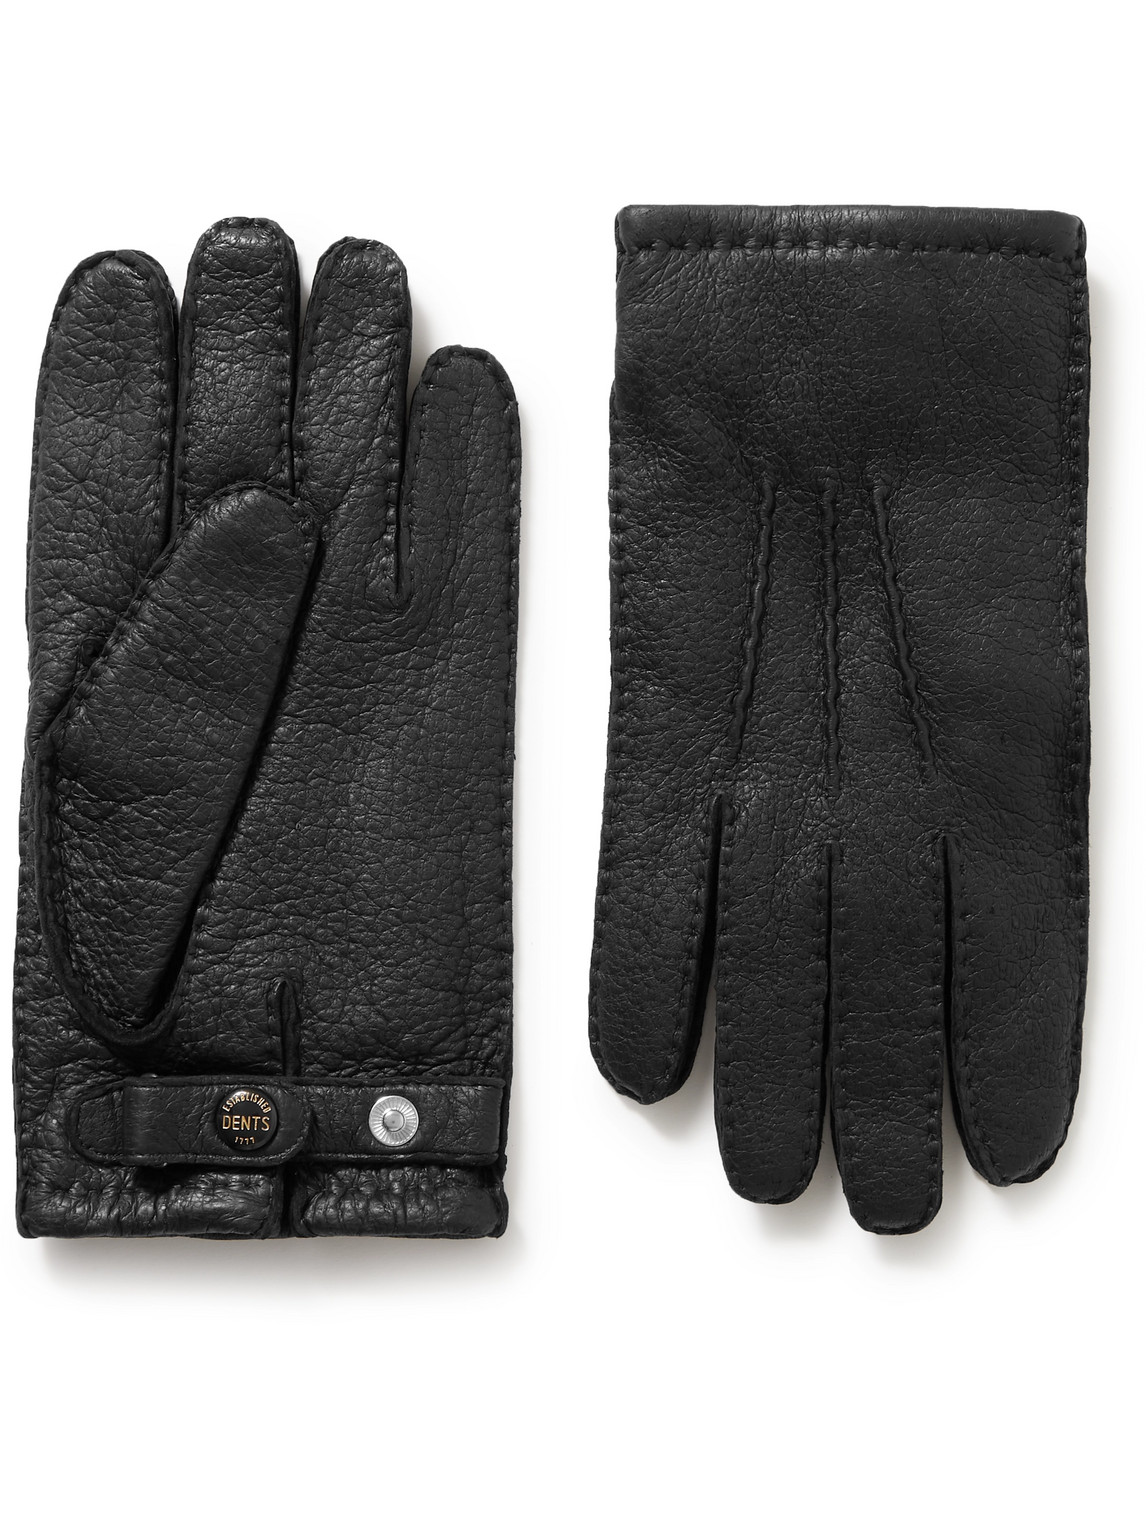 Hampton Cashmere-Lined Full-Grain Leather Gloves